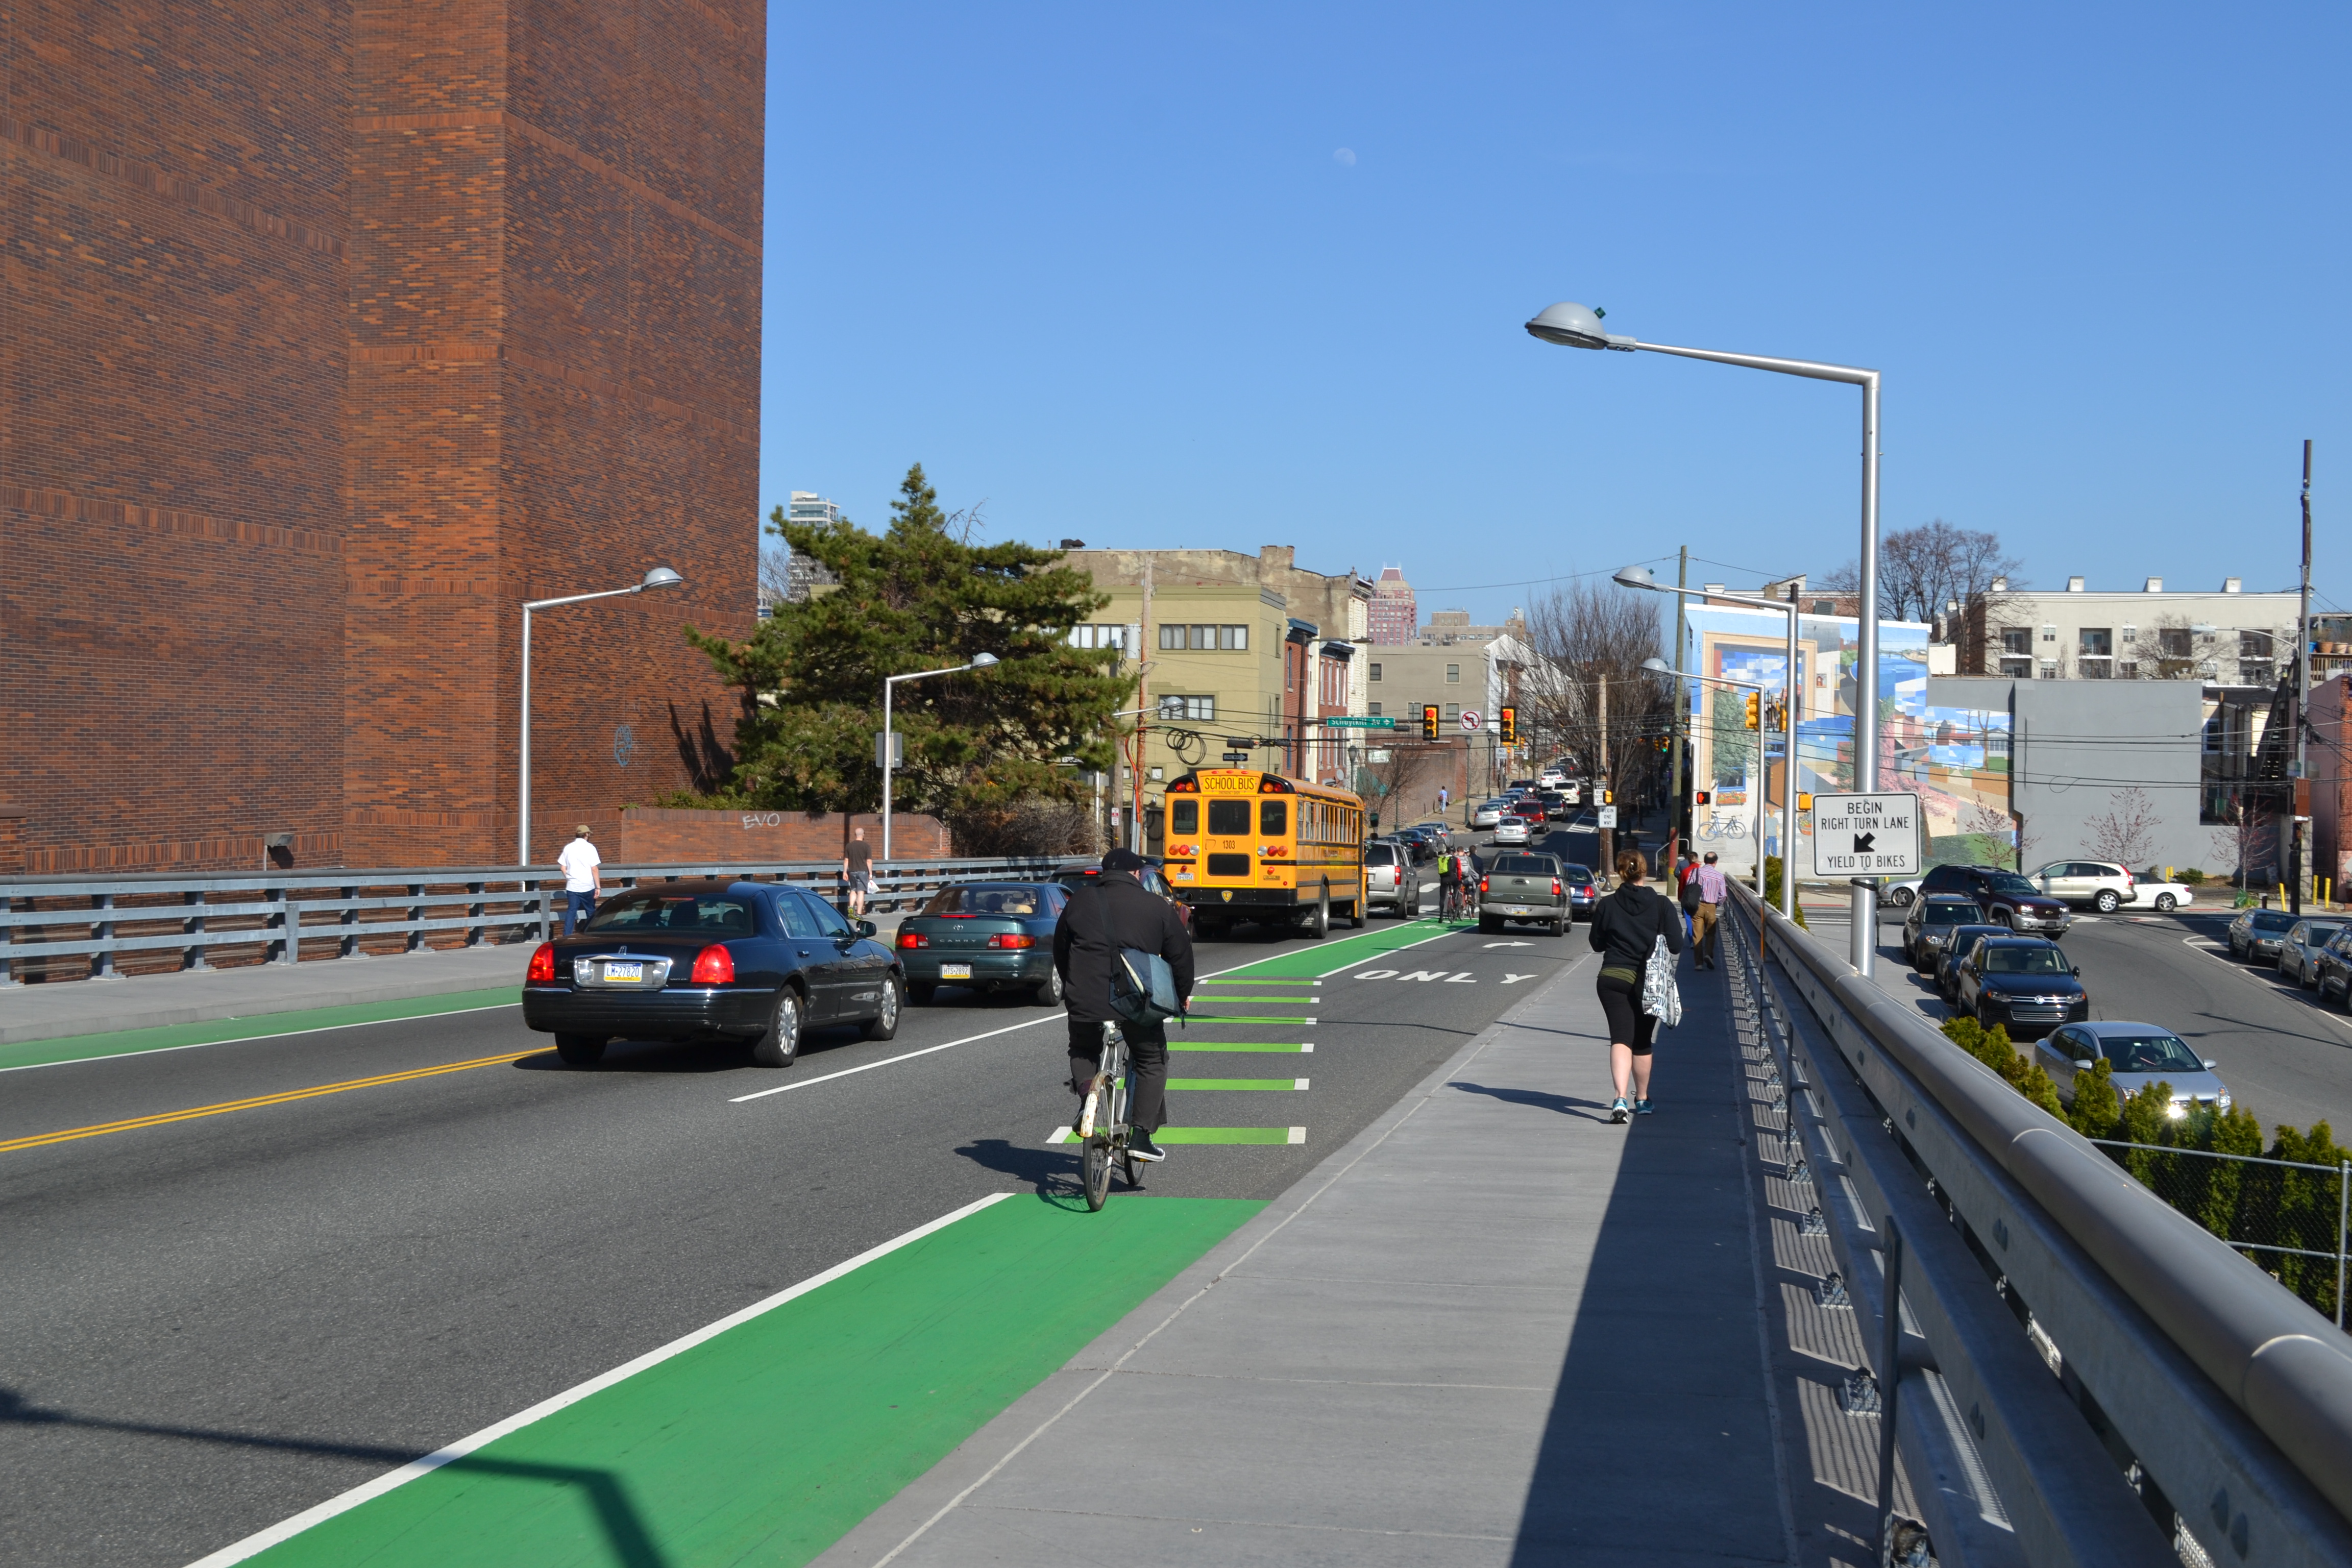 The current bike lane shifts near the Schuylkill Ave end of the bridge